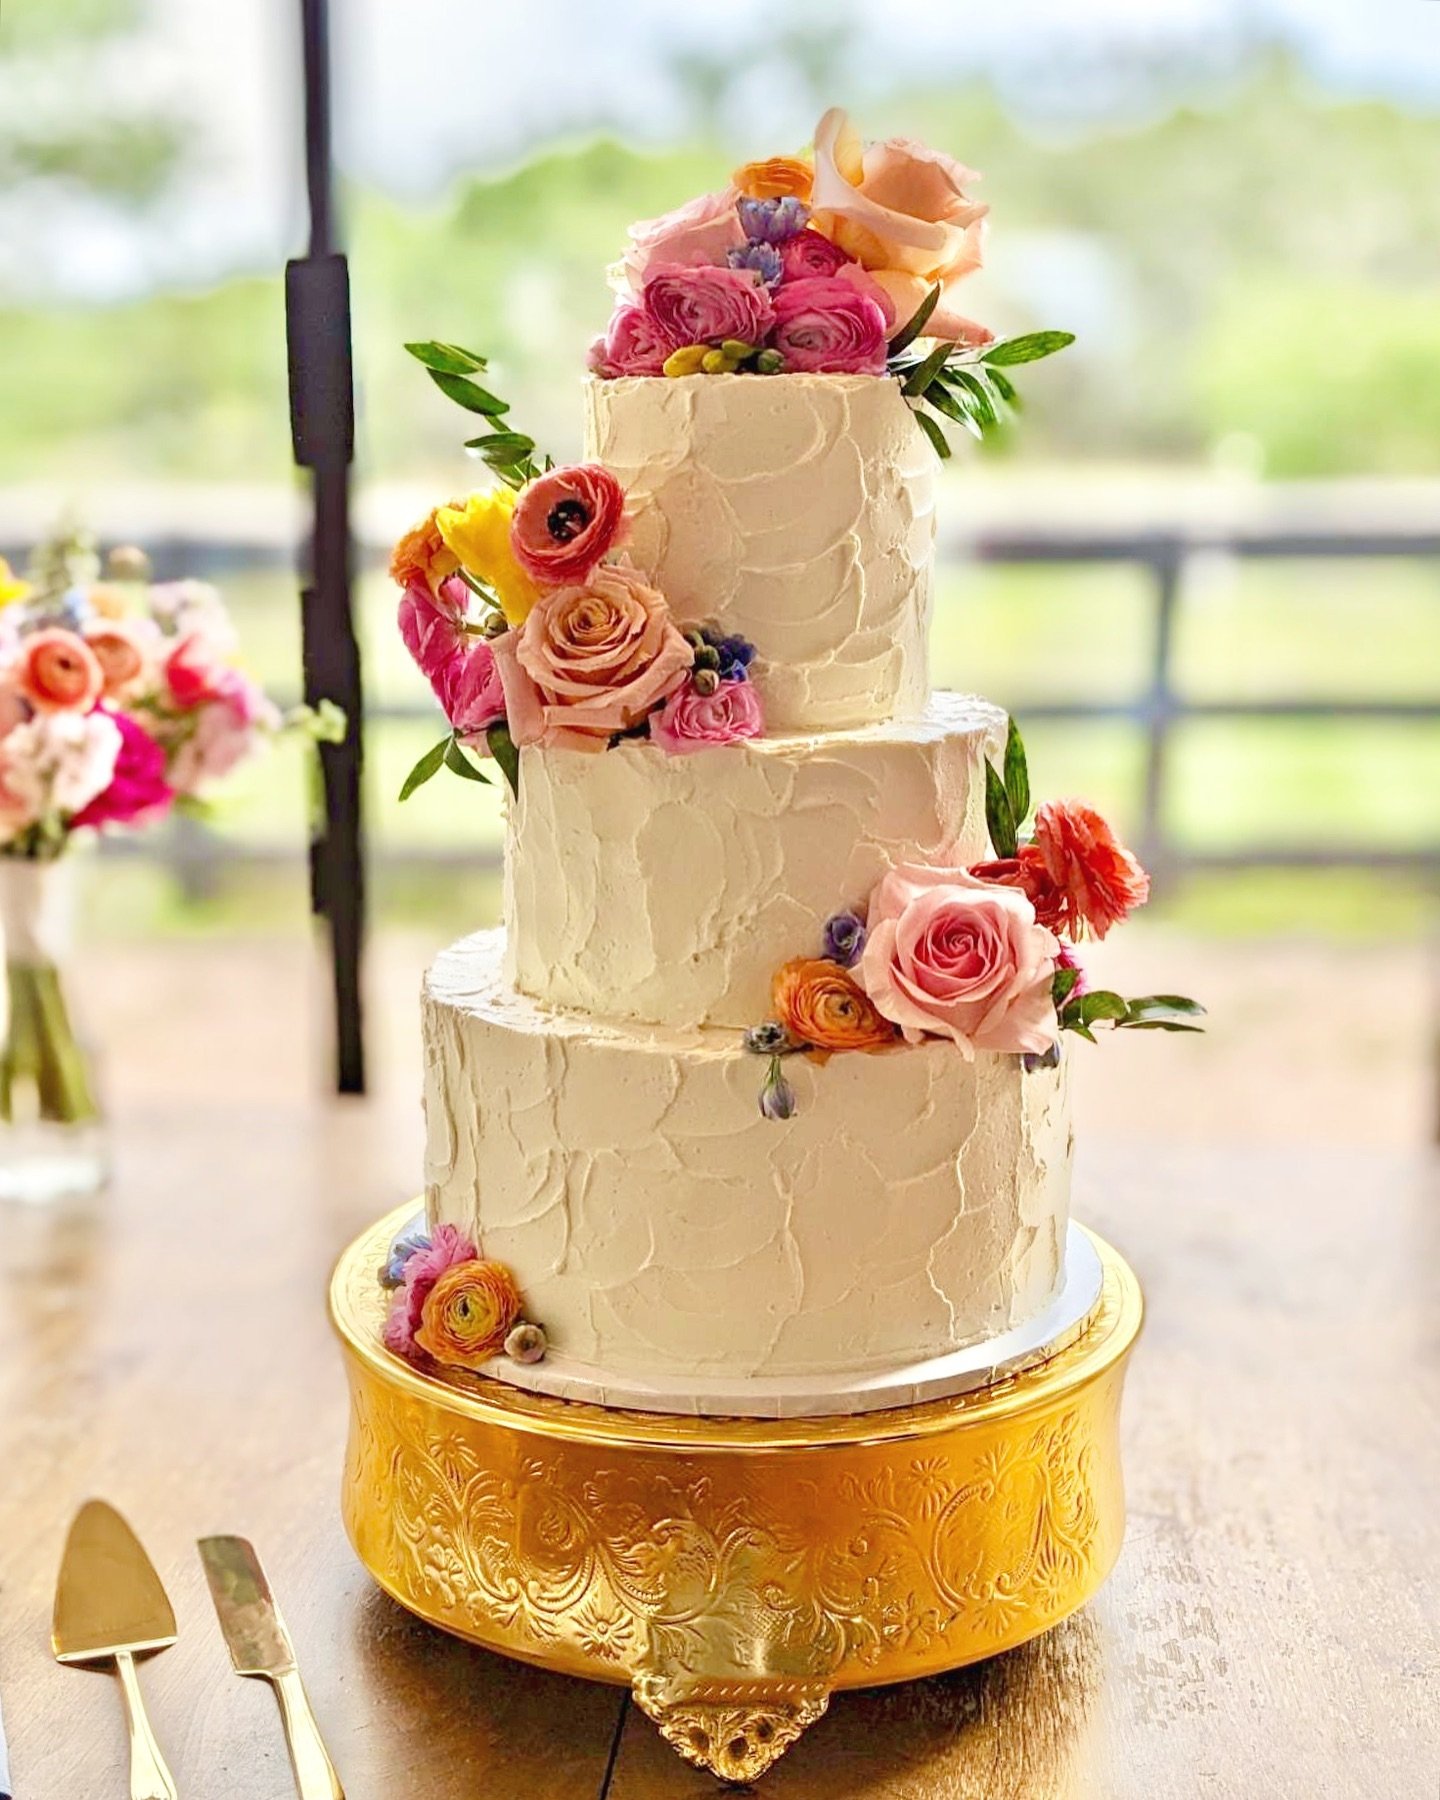 spackled buttercream and the happiest spring blooms that ever existed! this cake was such a dream! 💐

happy wedding day, lindsay &amp; scott!! 💕💍

#mindysbakeshop #wedding #weddingcake #buttercream #swissmeringuebuttercream #atxwedding #austin #at